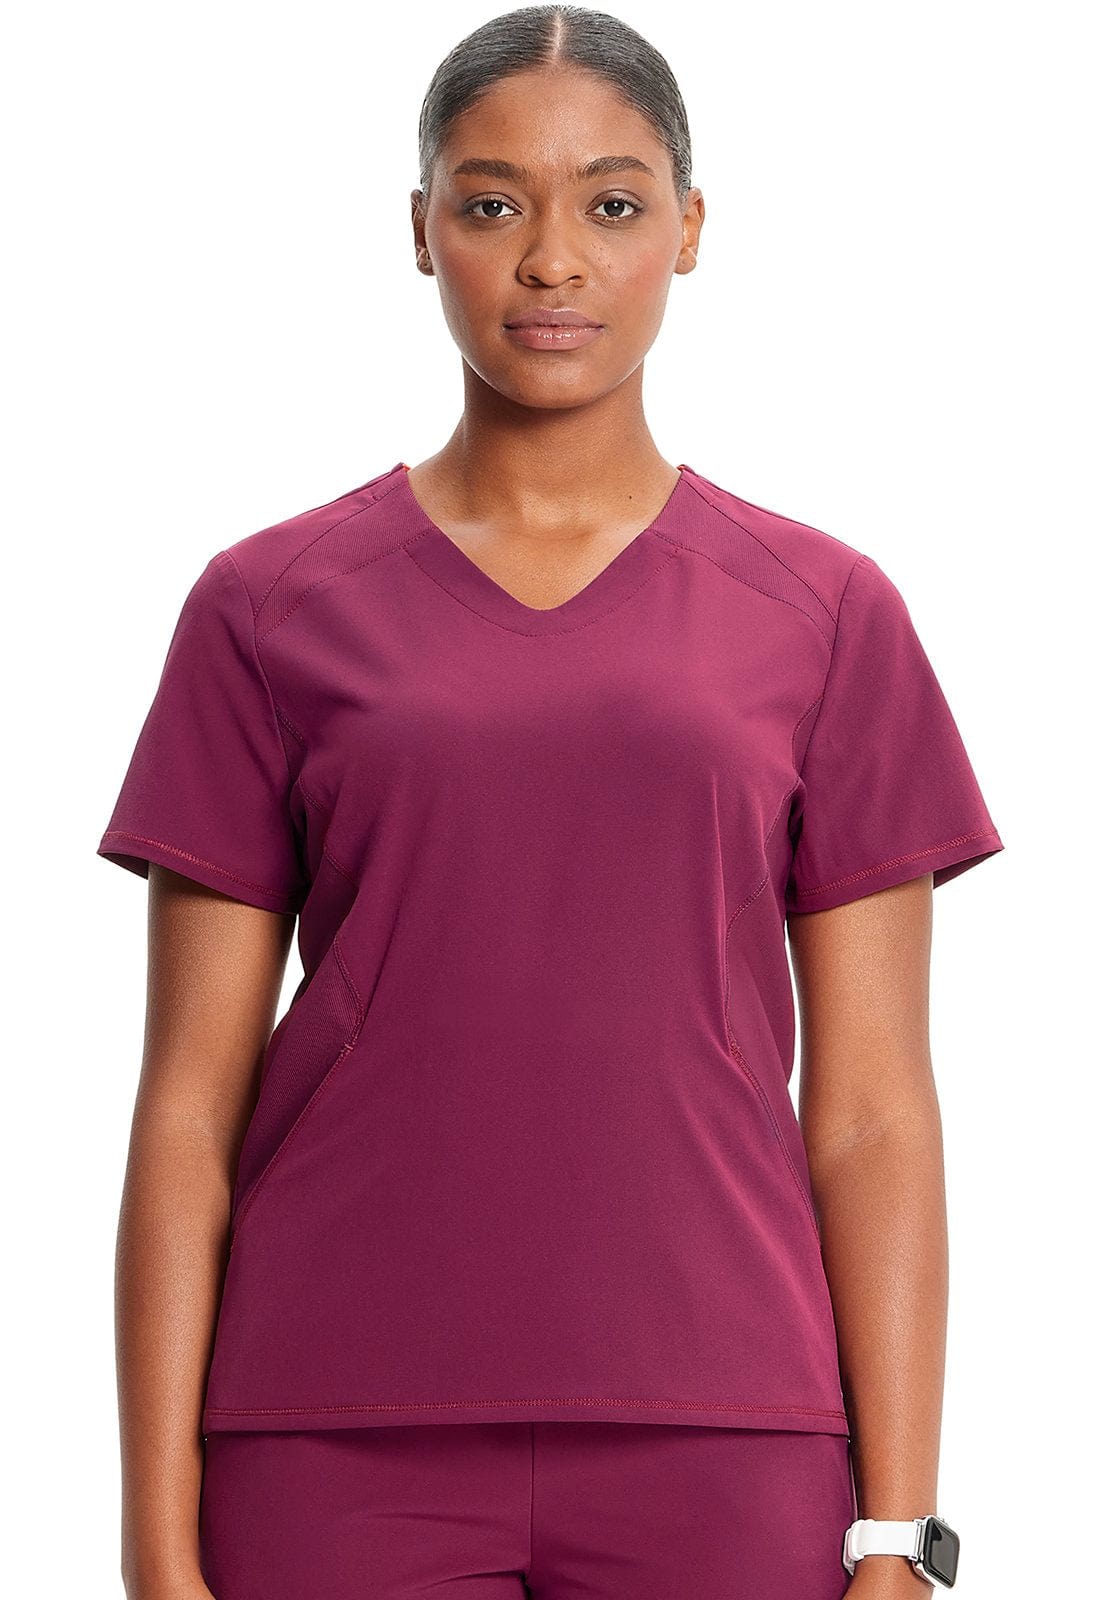 Infinity Infinity GNR8 Wine / 3XL Infinity GNR8  V-neck Top IN620A